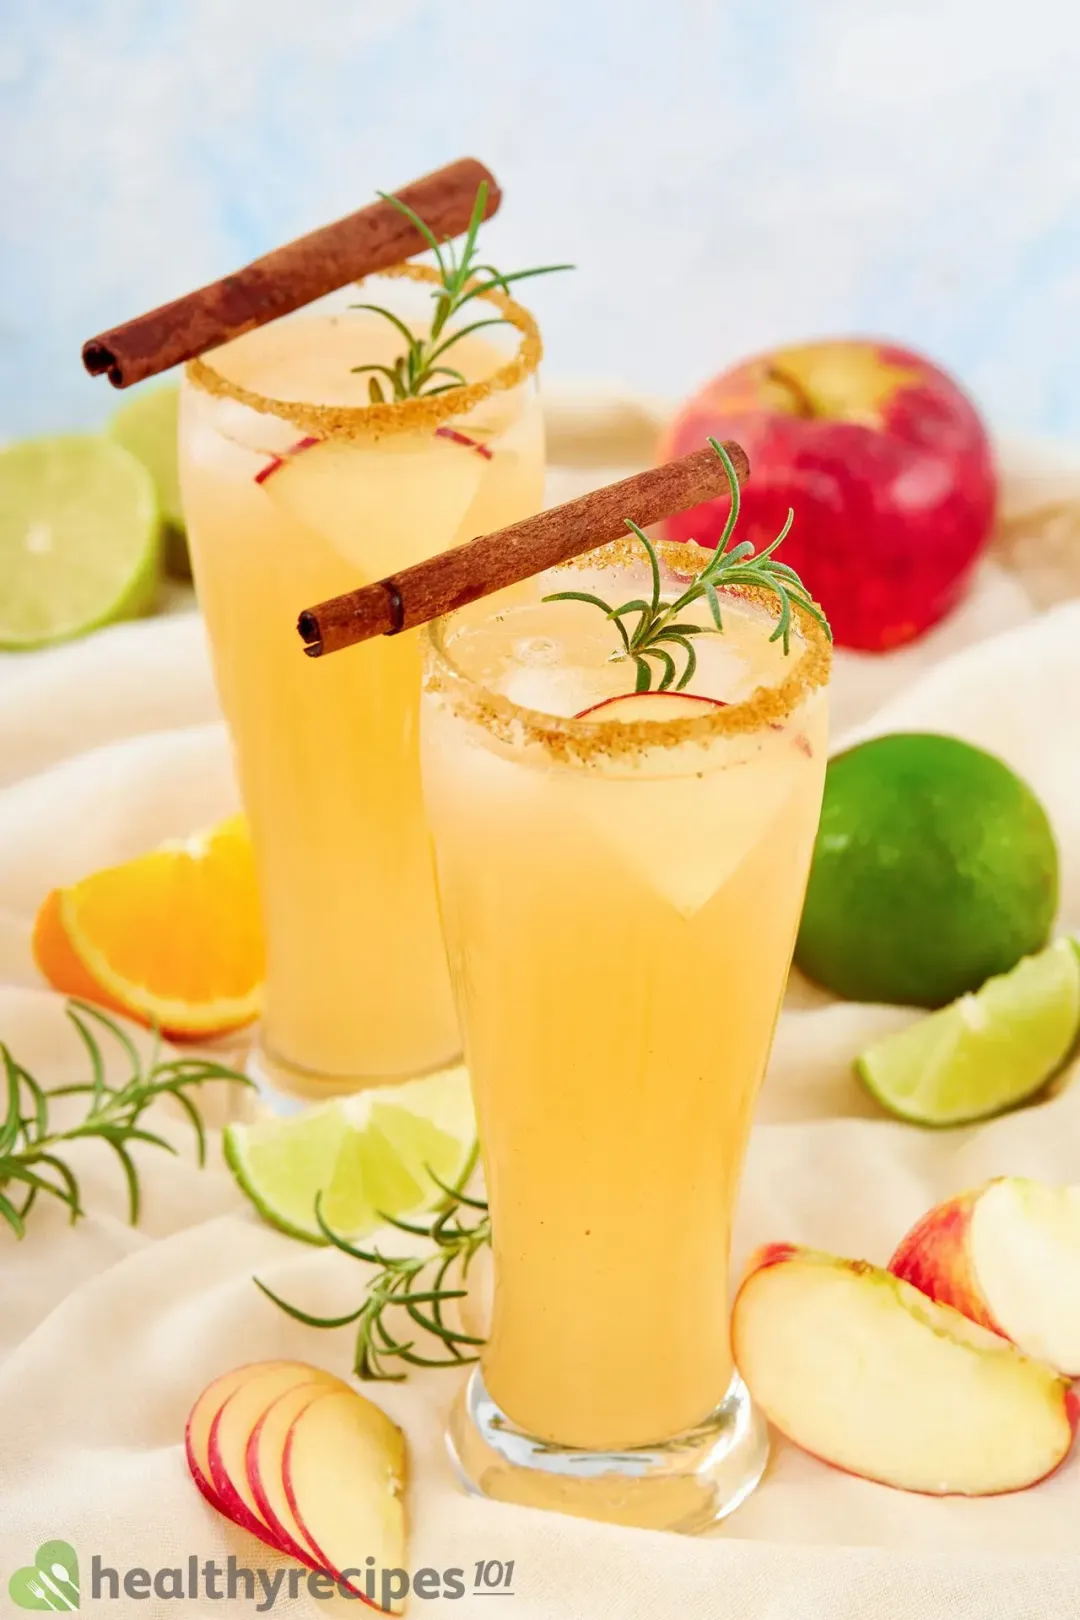 Apple cider vinegar glasses topped with cinnamon sticks, rosemary sprigs, surrounded by apple and citrus wedges